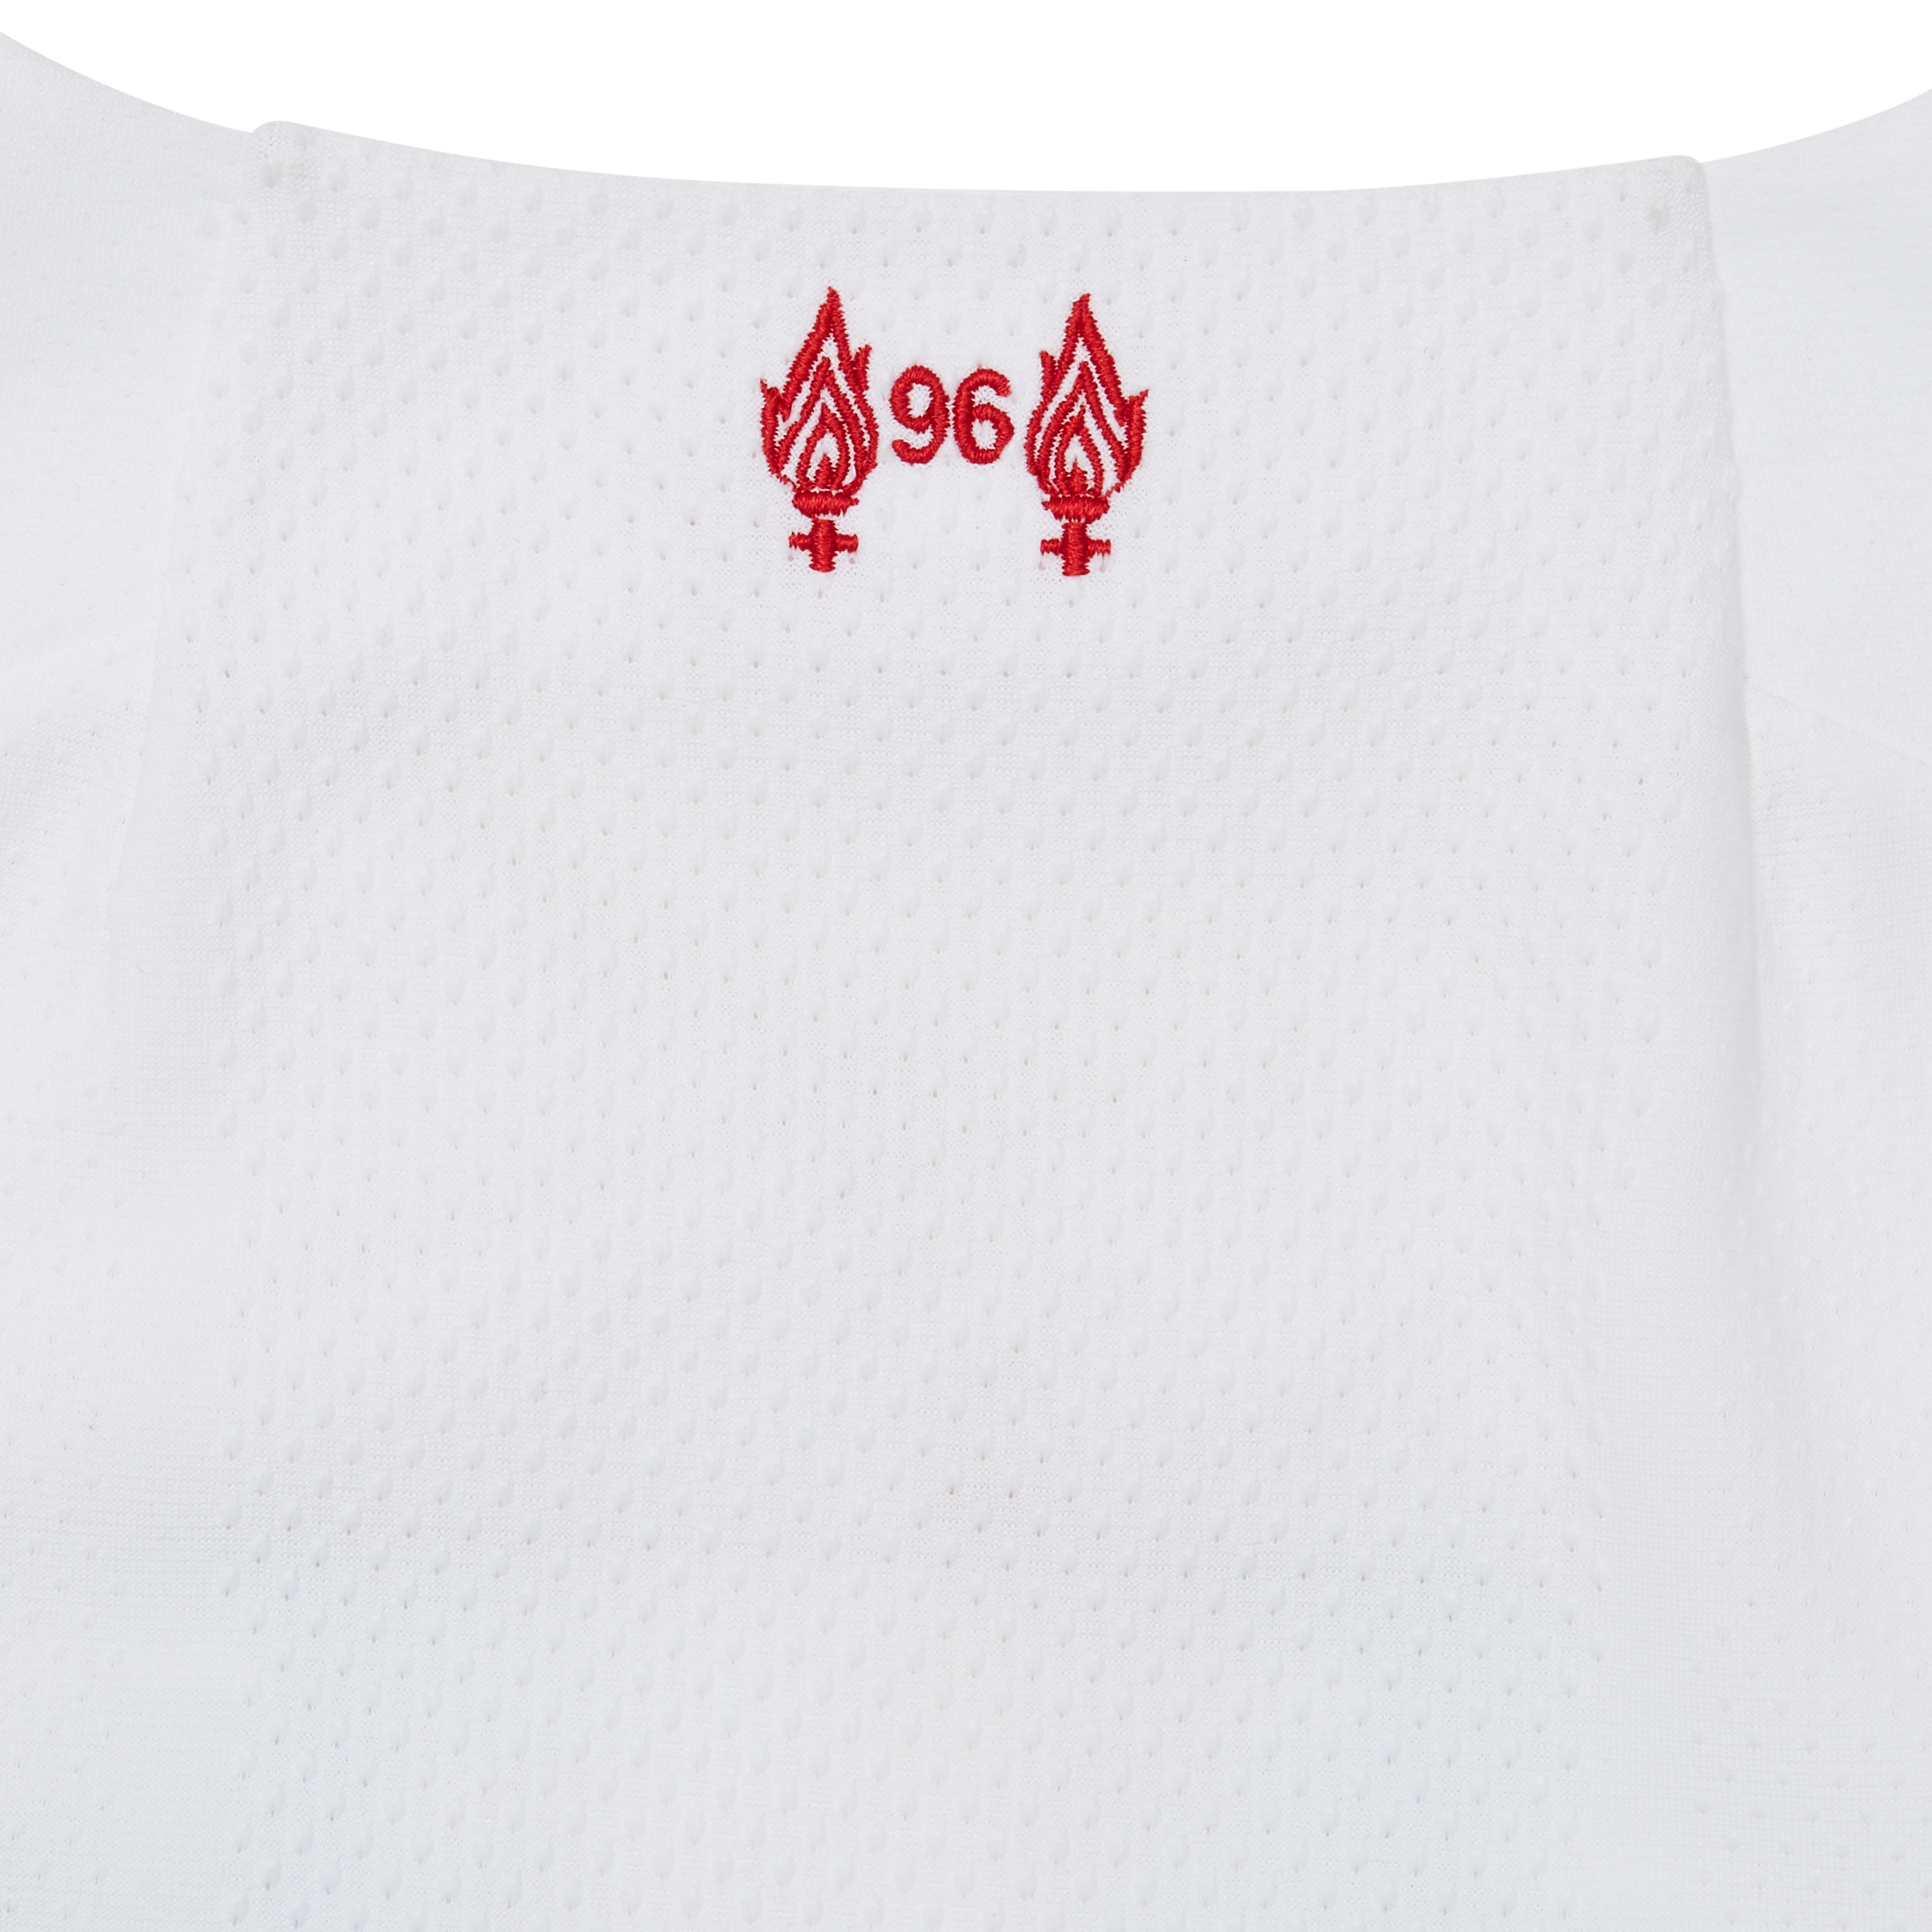 maglie liverpool 2019 2020